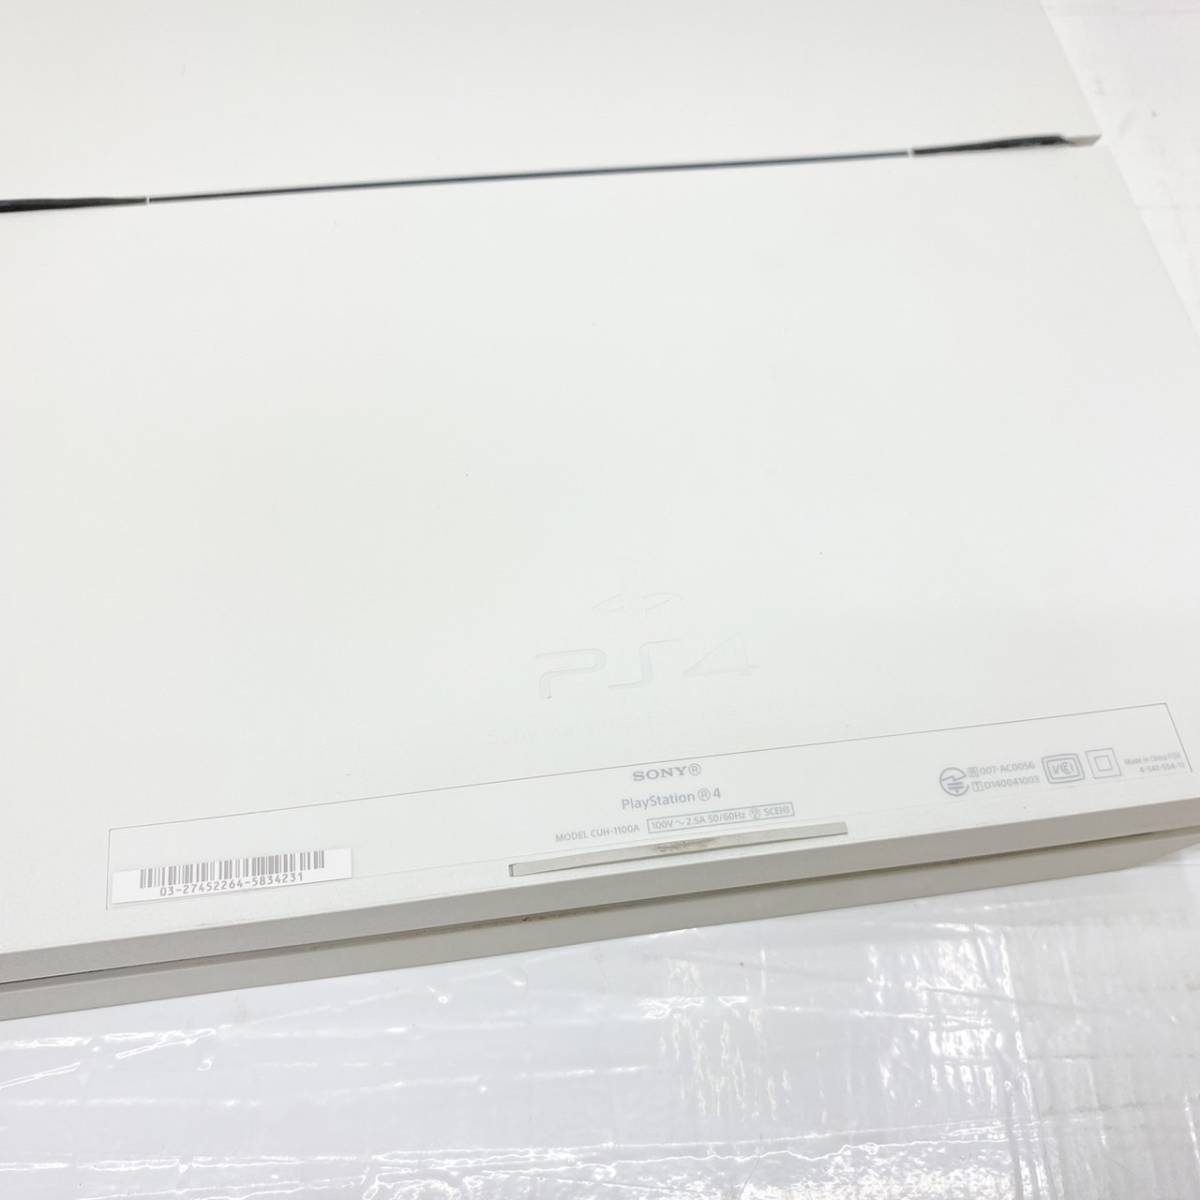  free shipping h50351 SONY Sony PlayStation4 PS4 body 500GB CUH-1100A white the first period . ending 